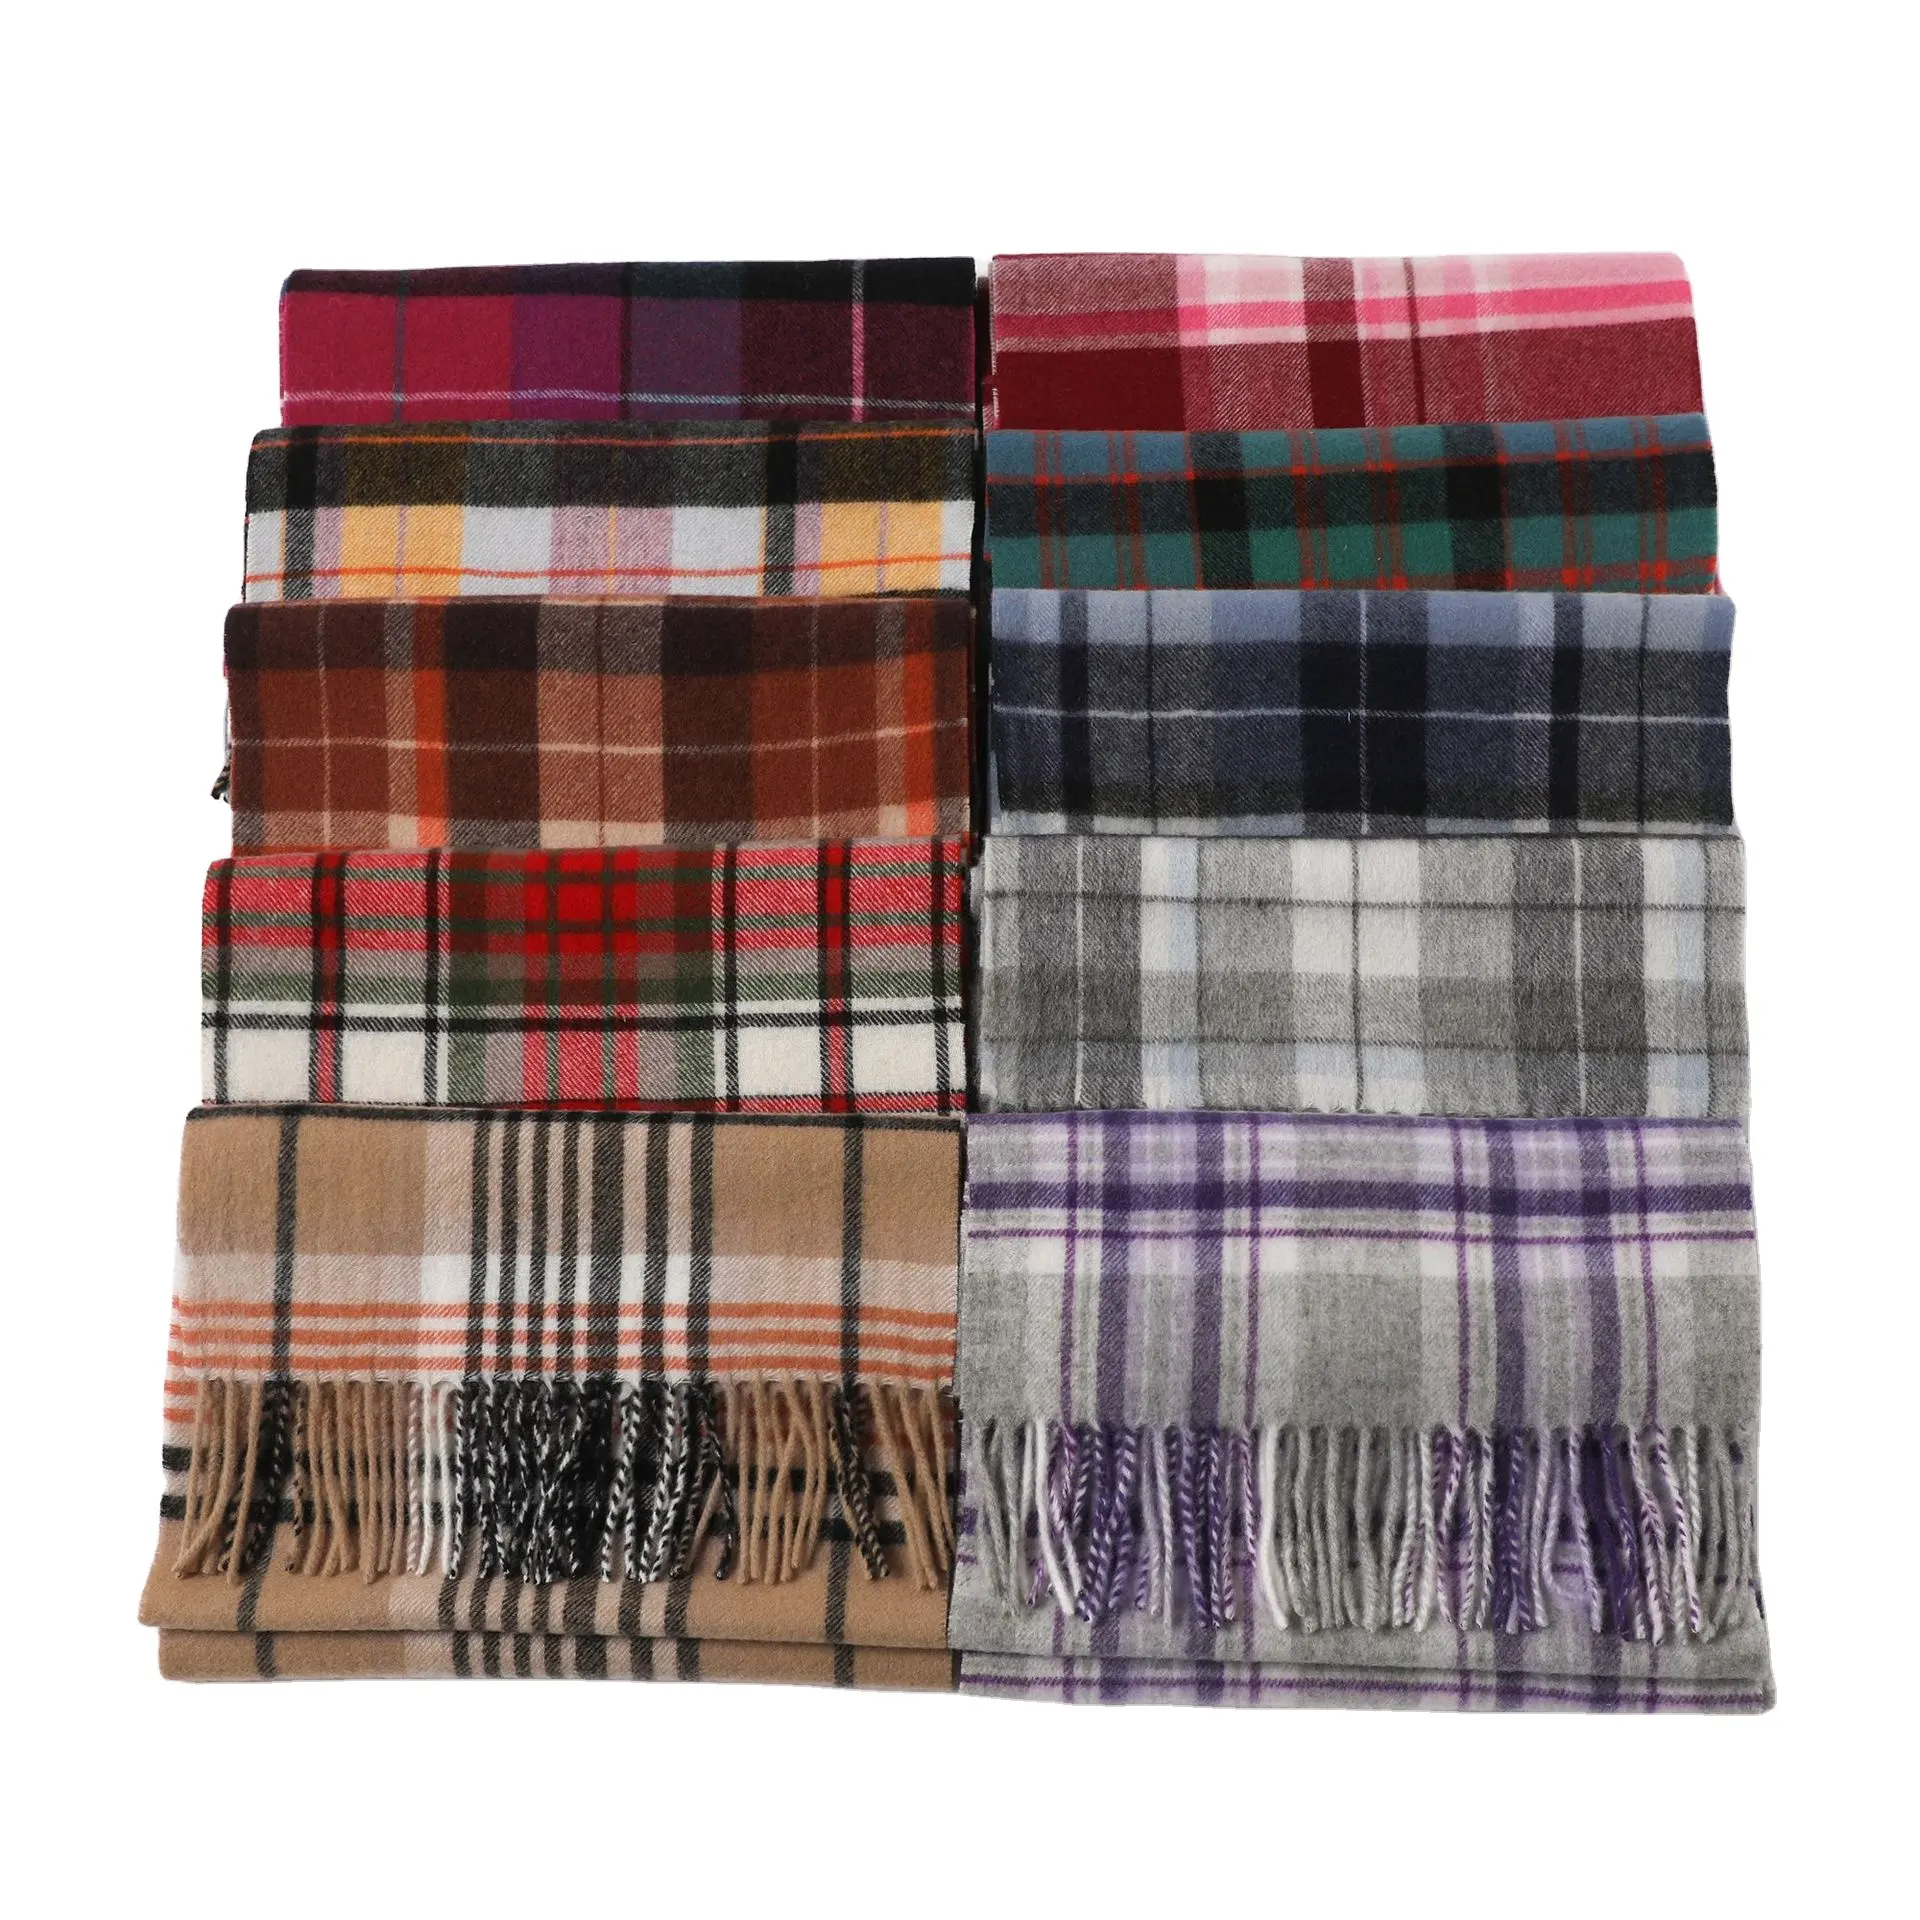 BESTELLA foam 100% Cashmere Plaid scarf wool luxury Pashmina Neck Scarves Shawl Plaid Blanket Scarf Checked Style for Winter